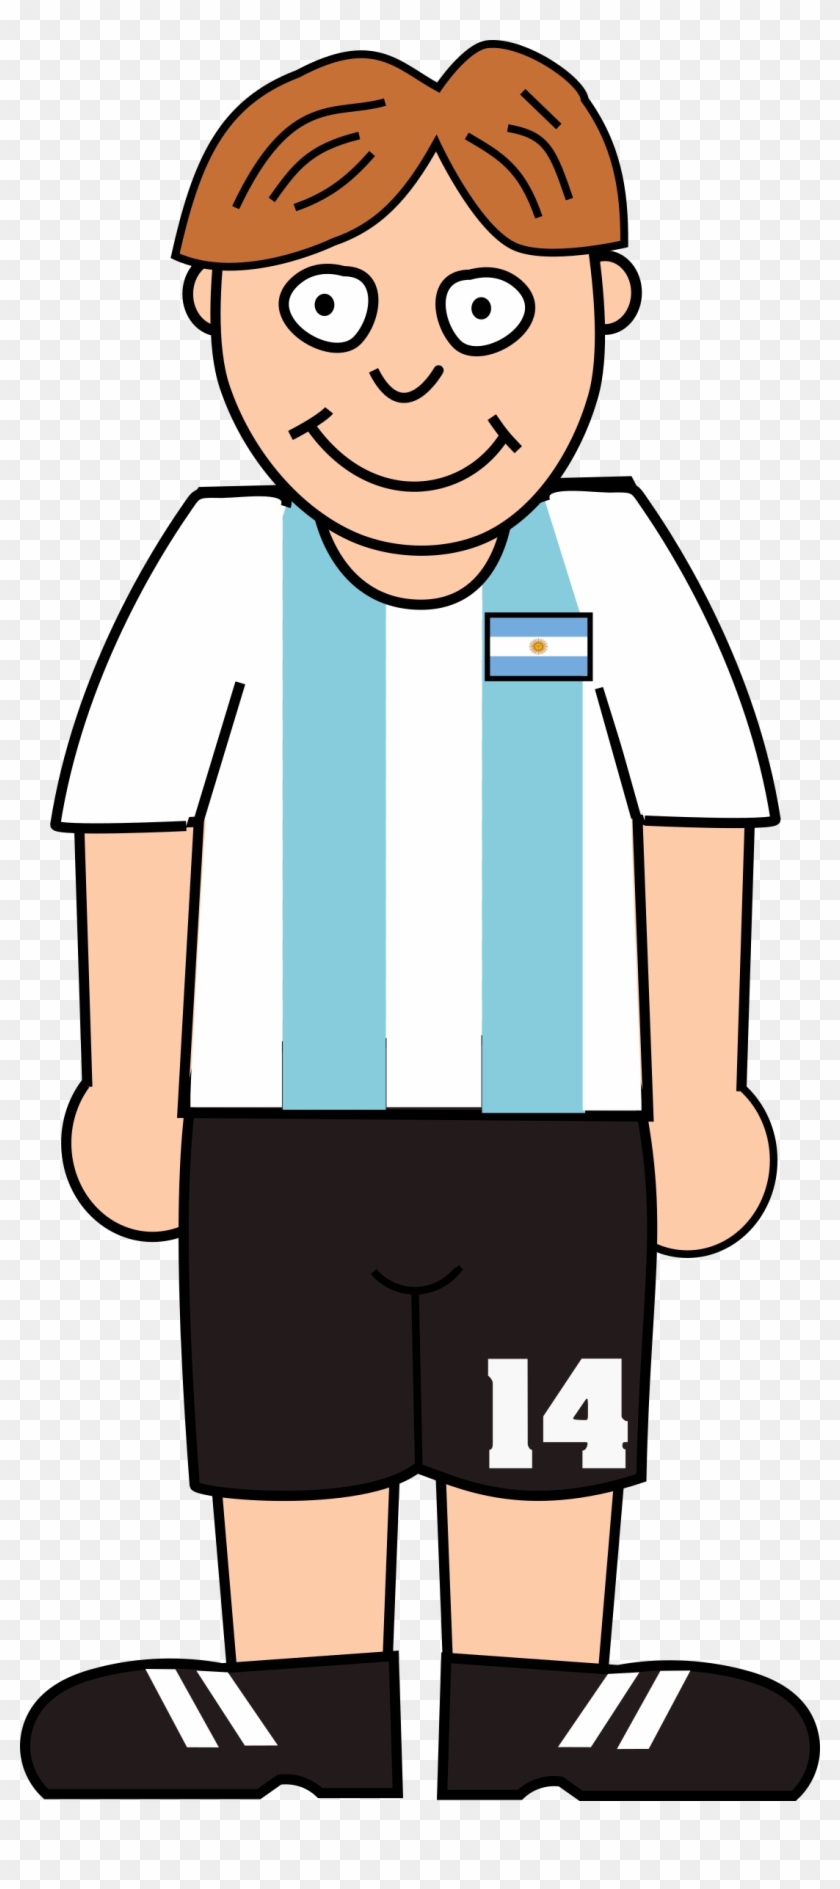 Big Image - World Cup Soccer Player Clipart Png #879536